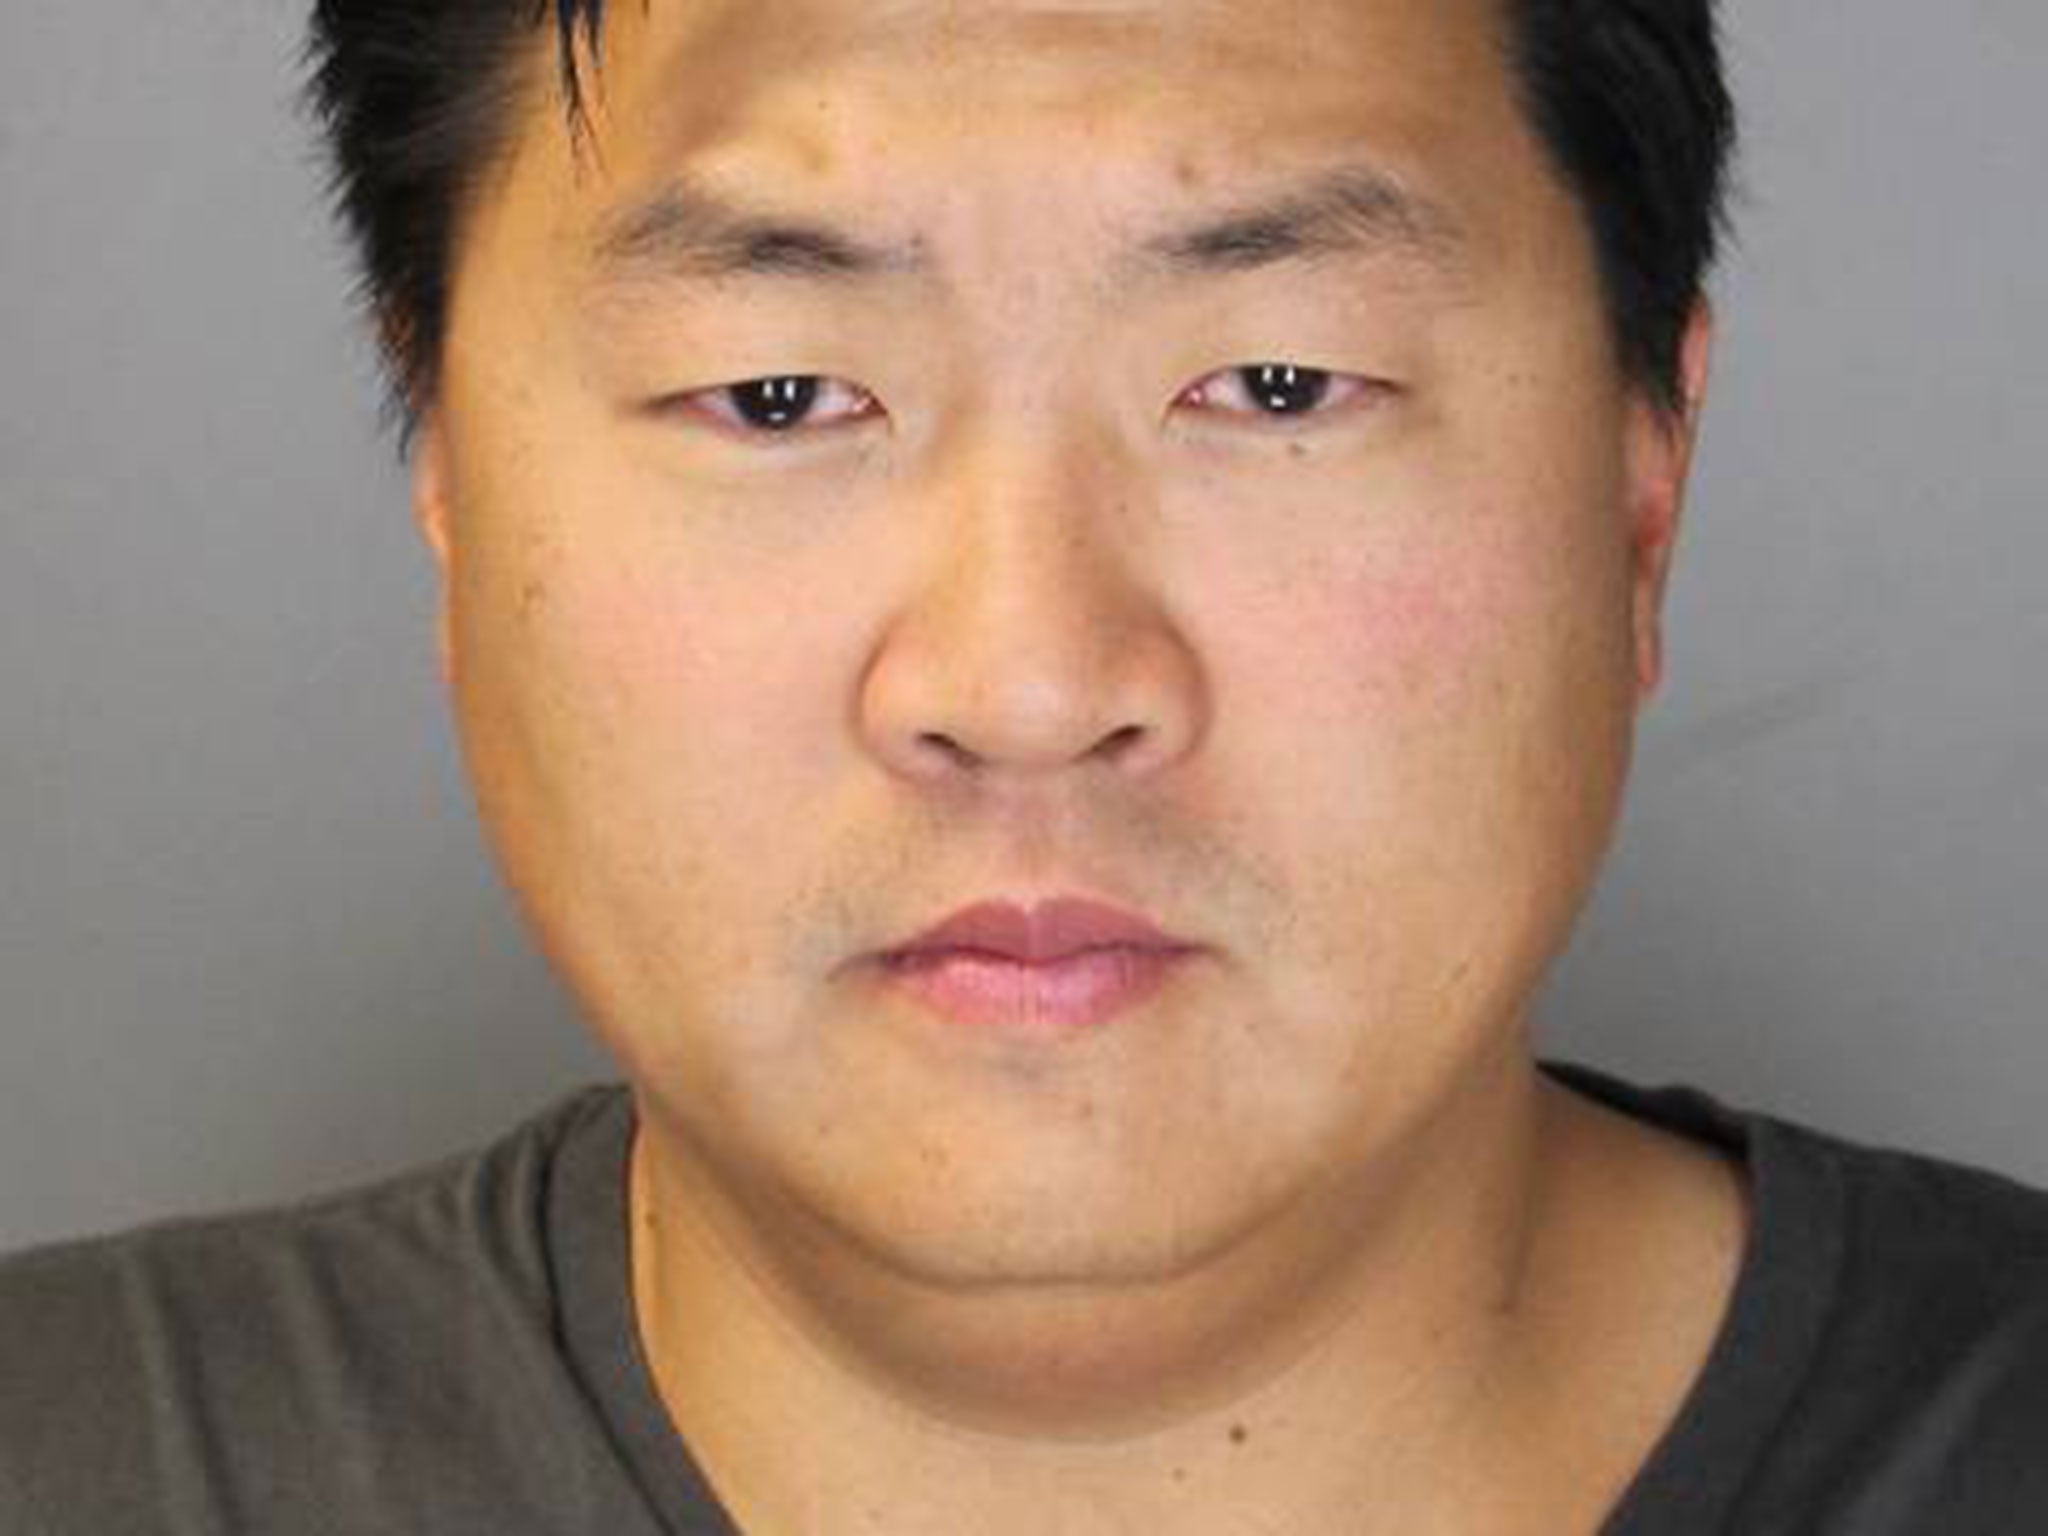 FILE - Photo provided Sept. 20, 2013 by the Suffolk County District Attorney's Office shows Jason Lee in Hauppauge